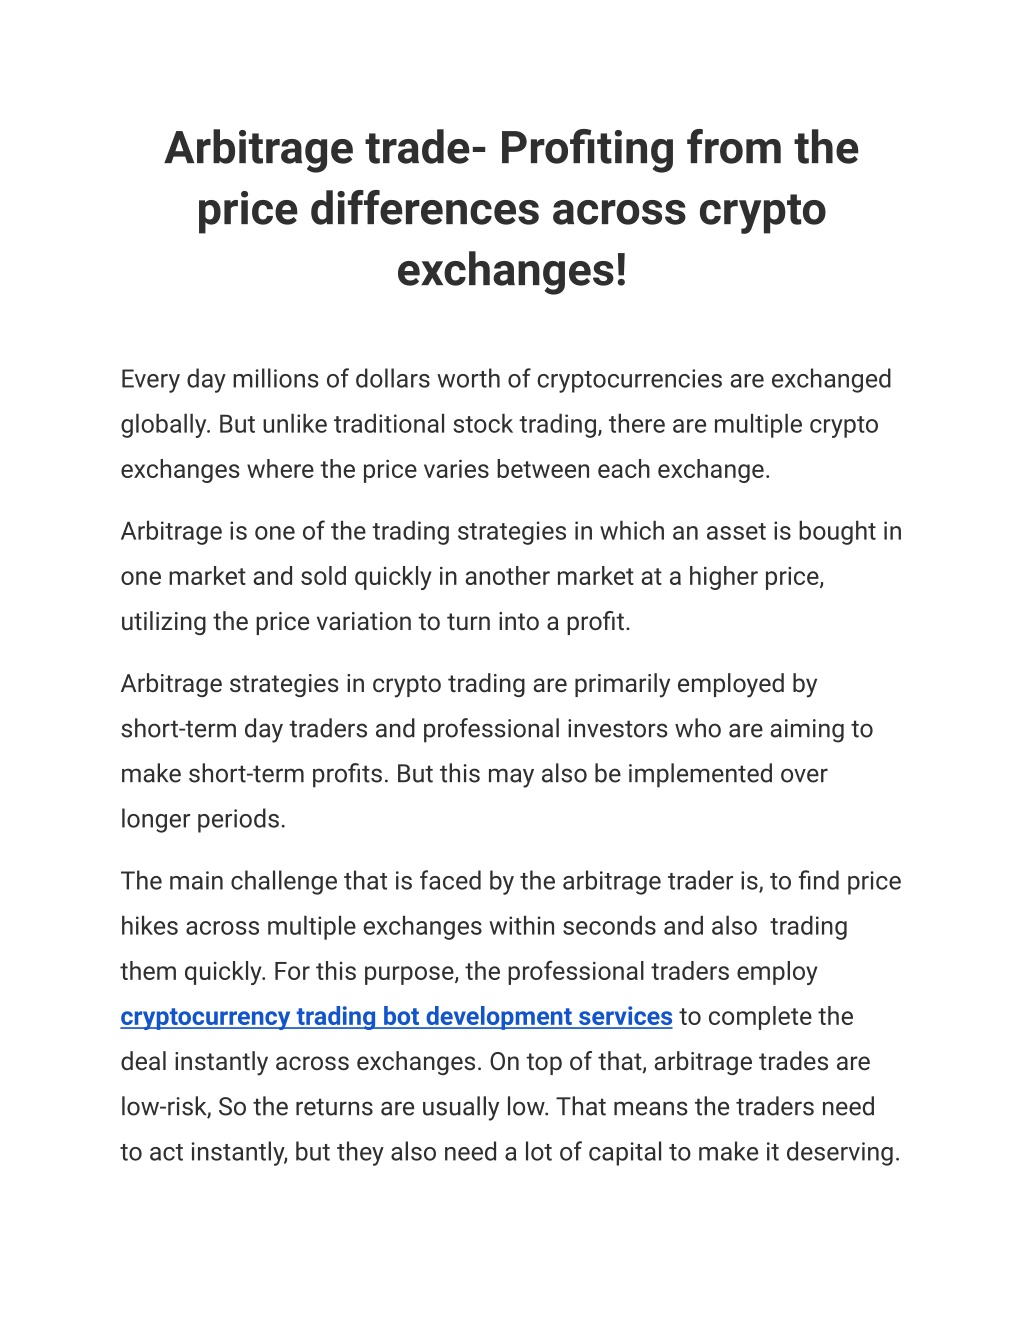 profiting from price differences across crypto exchanges